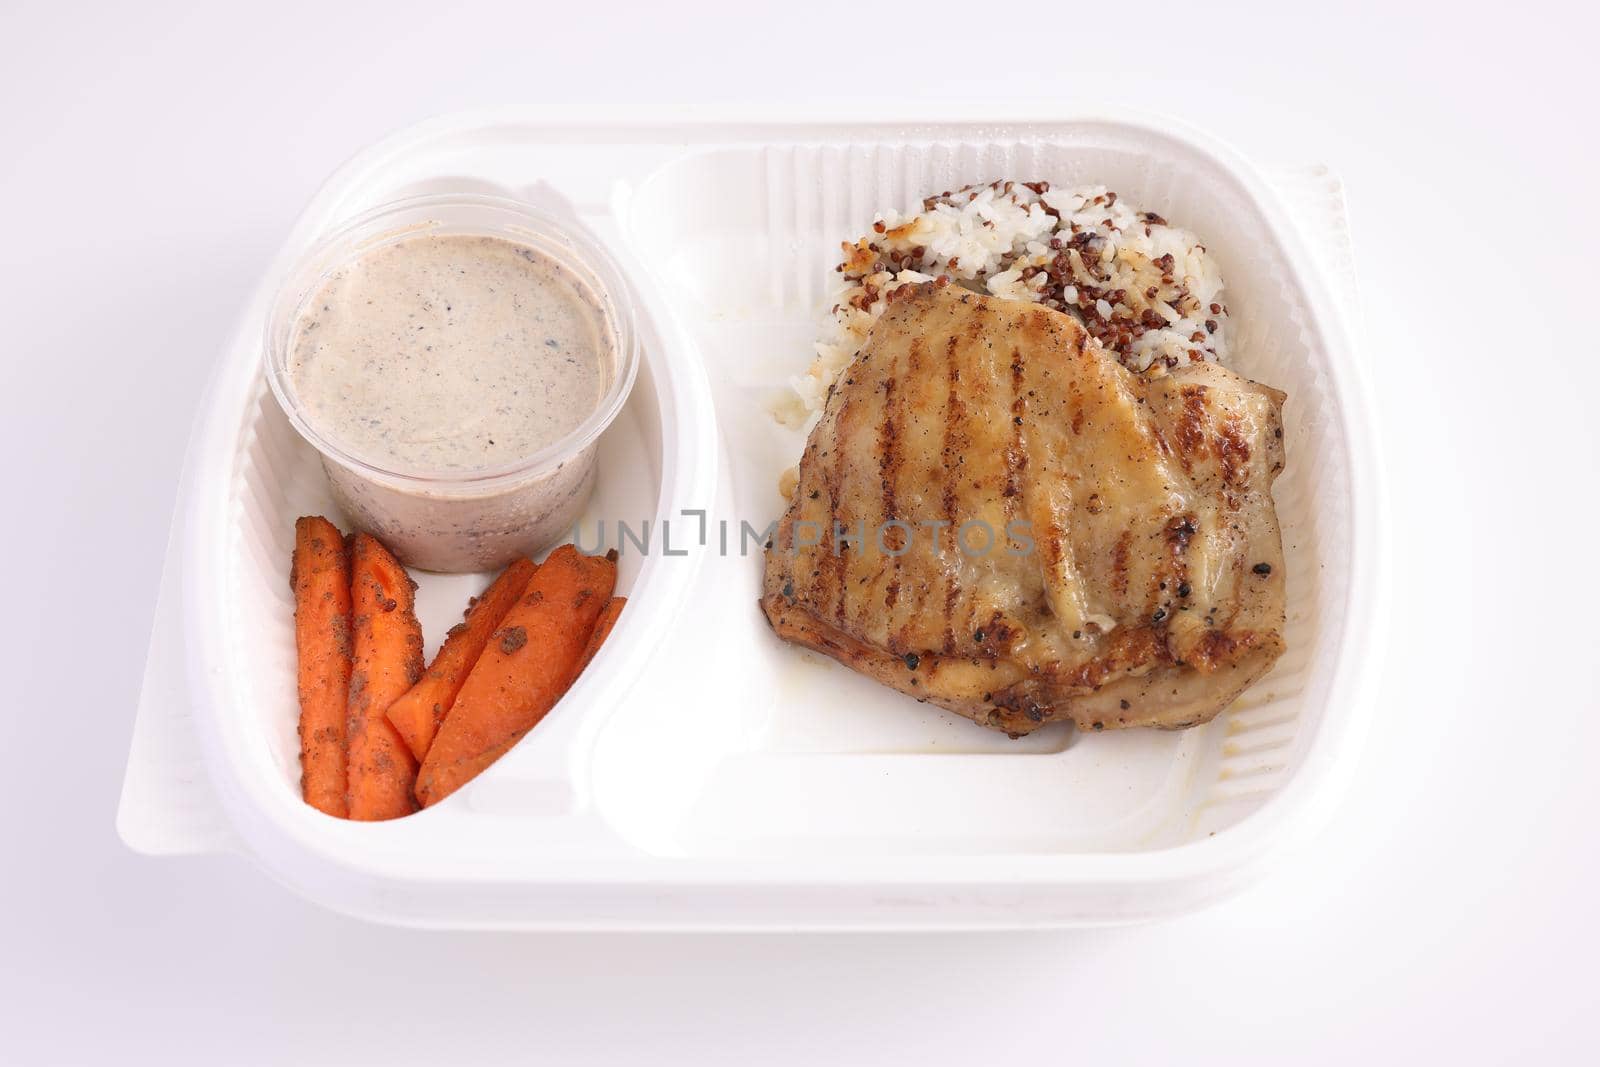 Grilled chicken with rice with delivery take home package isolated in white background by piyato